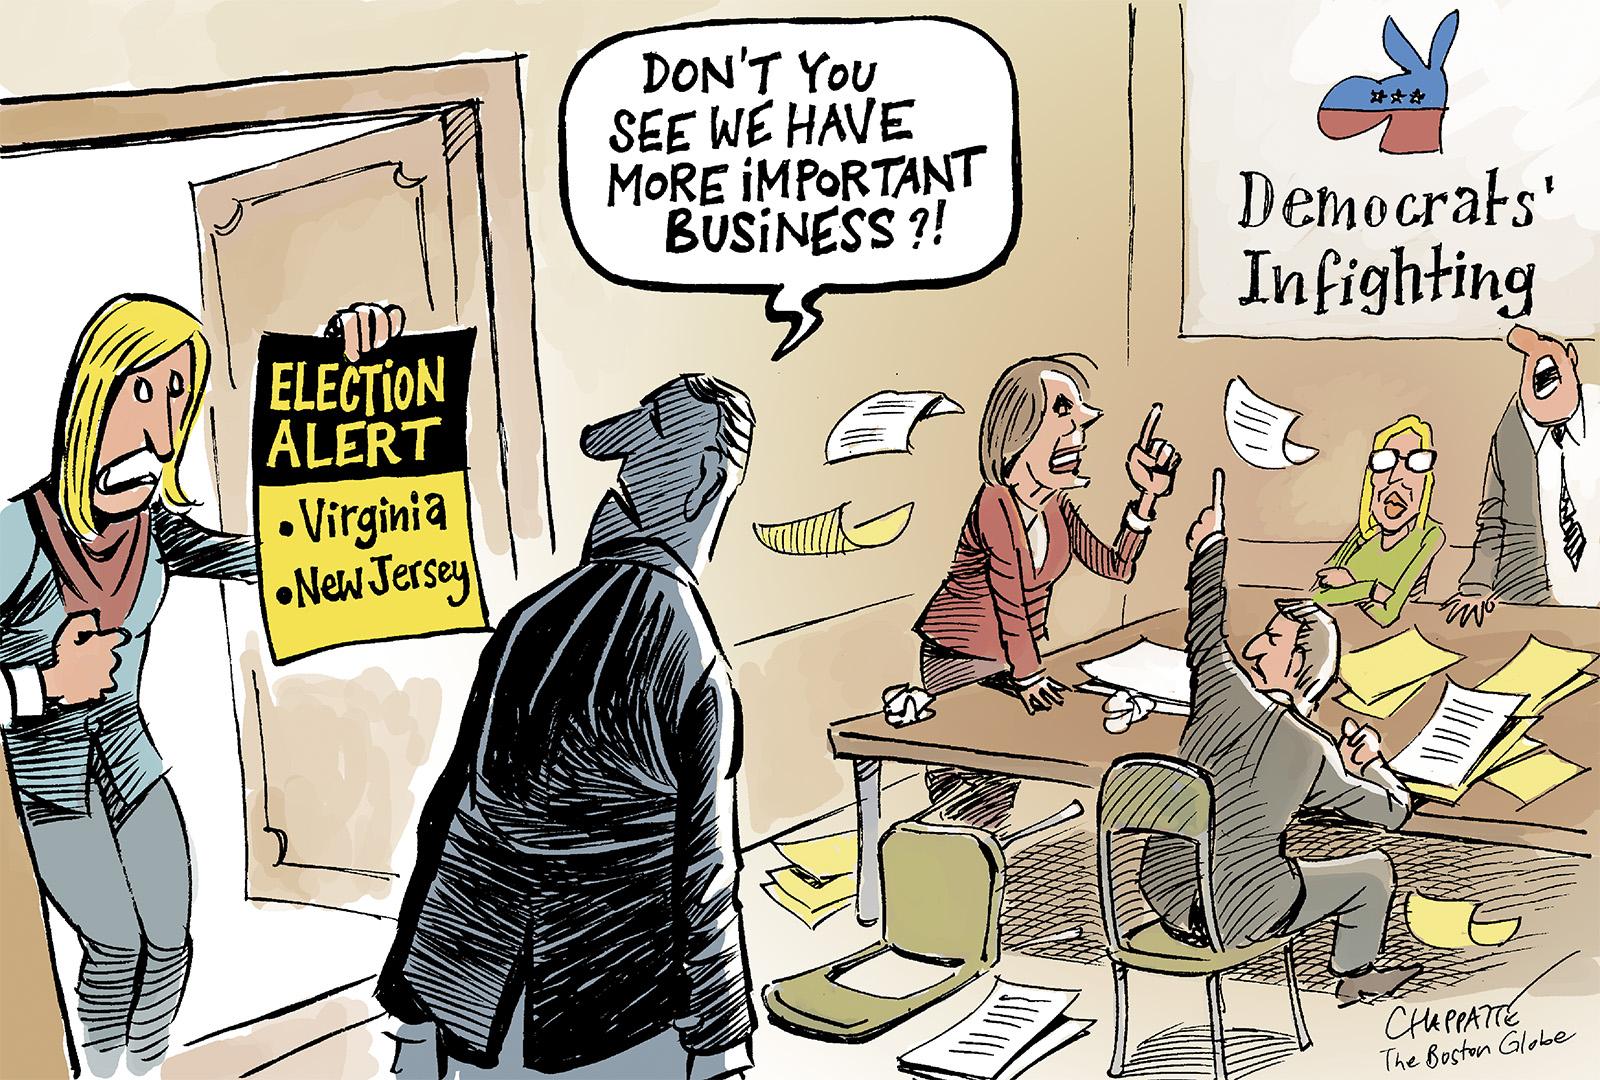 Worrying election day for Democrats